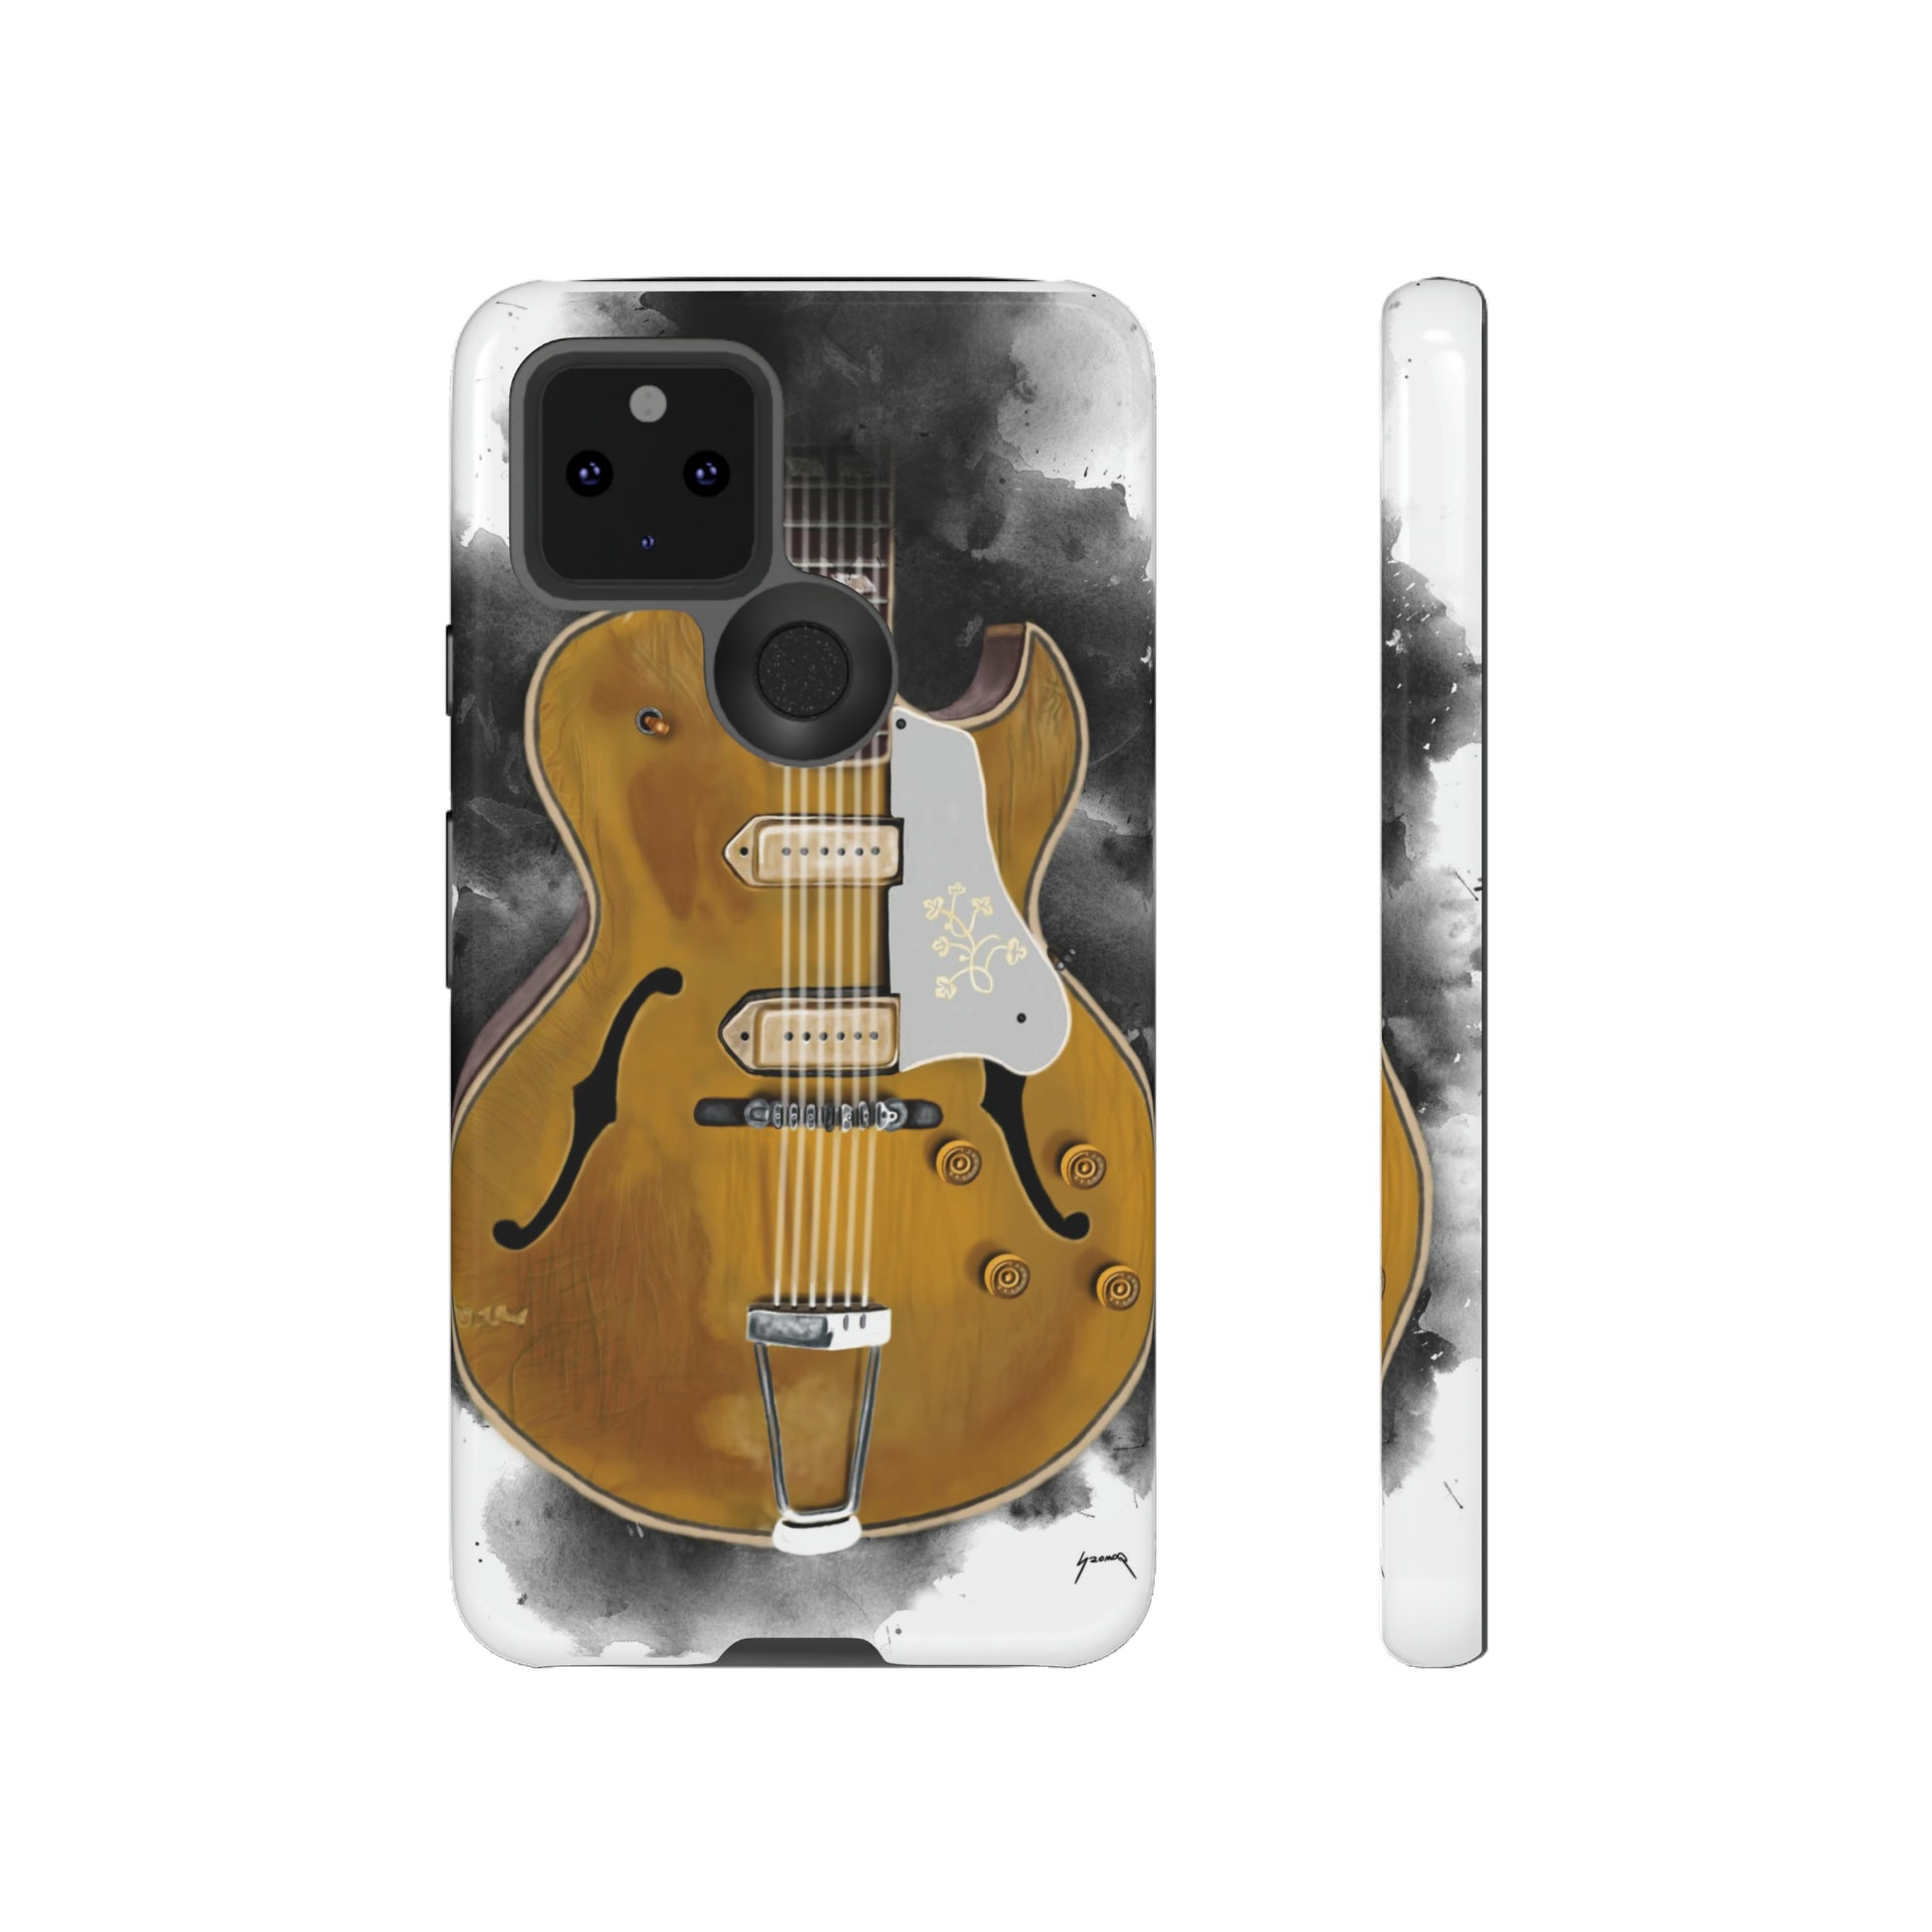 Digital painting of a goldtop vintage electric guitar printed on a google phone case